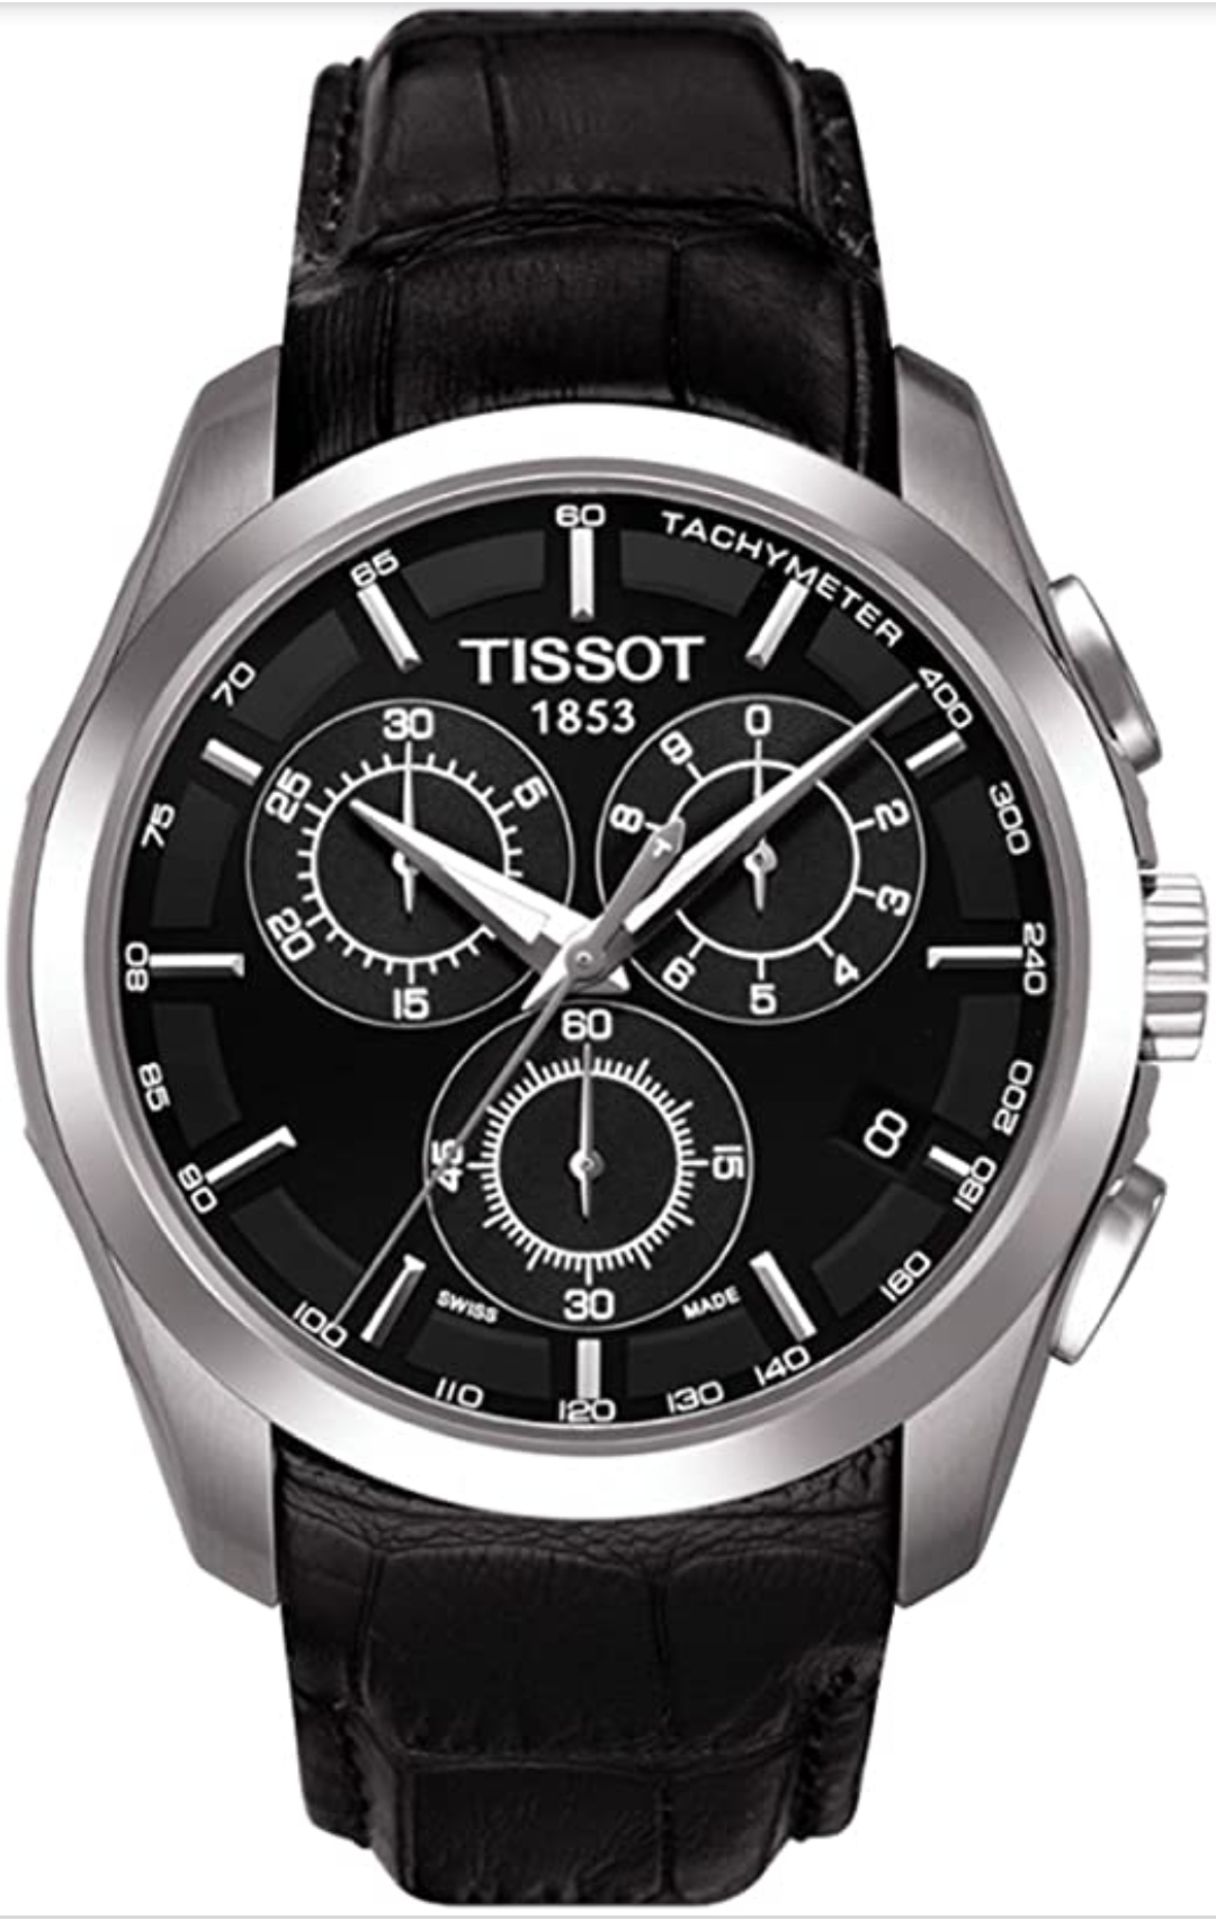 Tissot T-Trend Couturier T035.617.16.051.00 Chronograph Watch For Men - Image 5 of 11